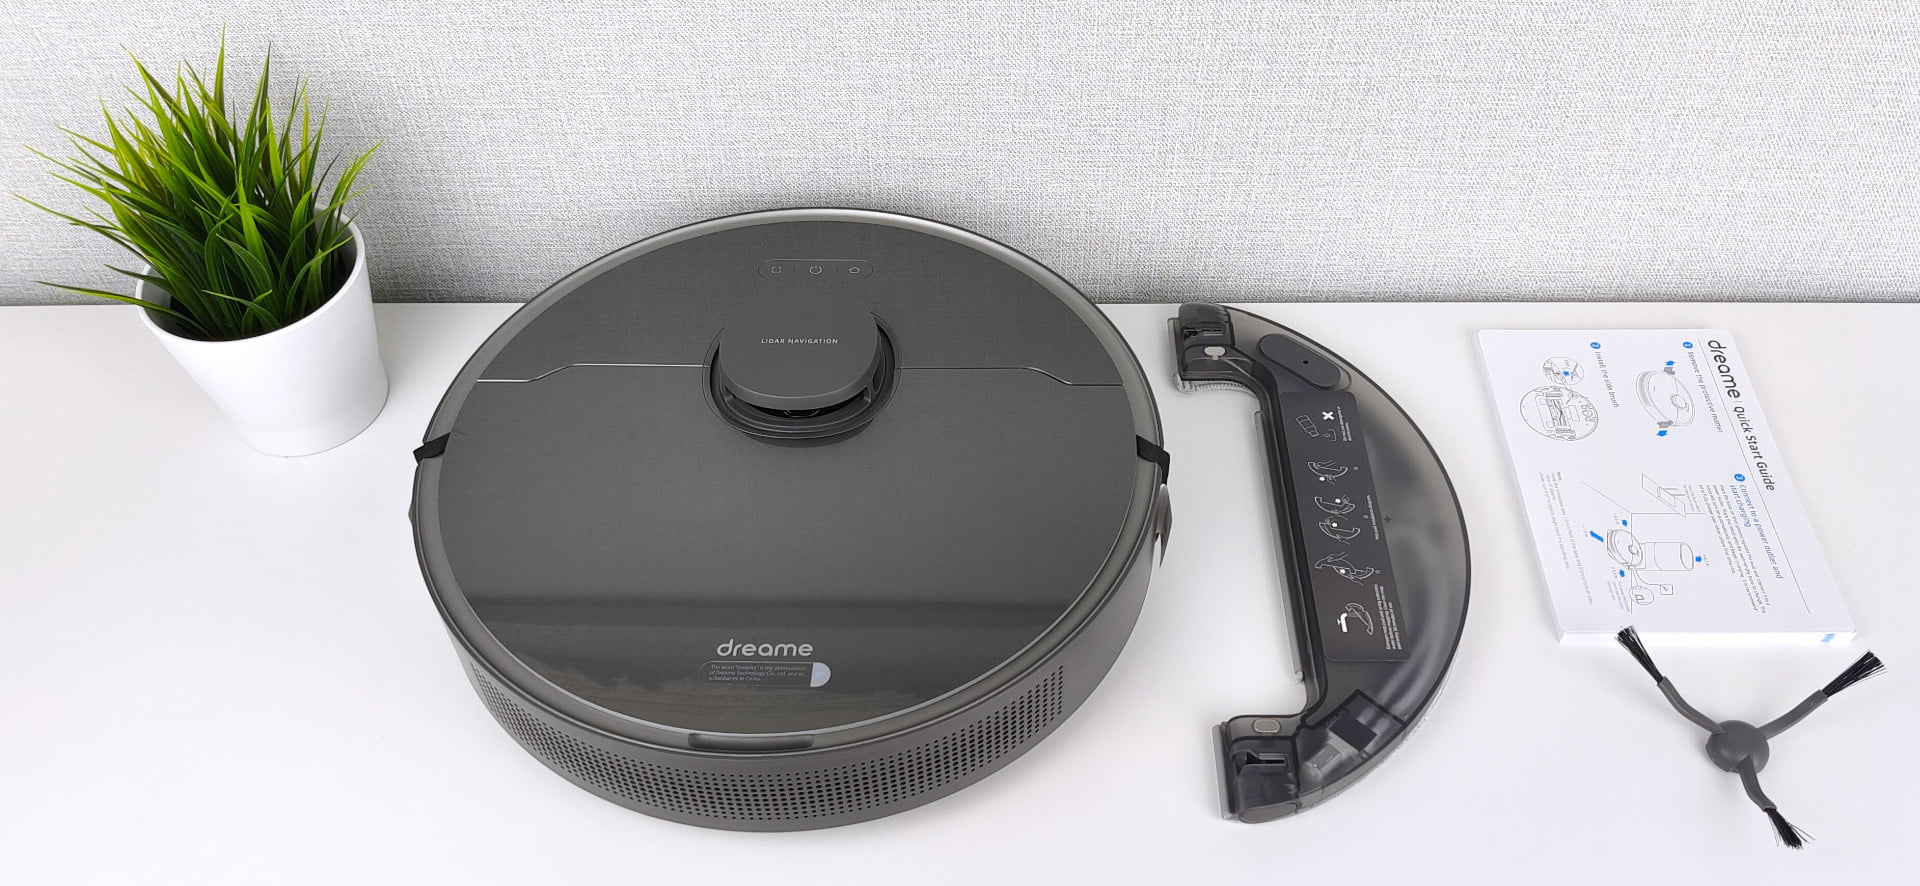 Dreame Bot Z10 Pro Review - Top vacuum robot with suction station